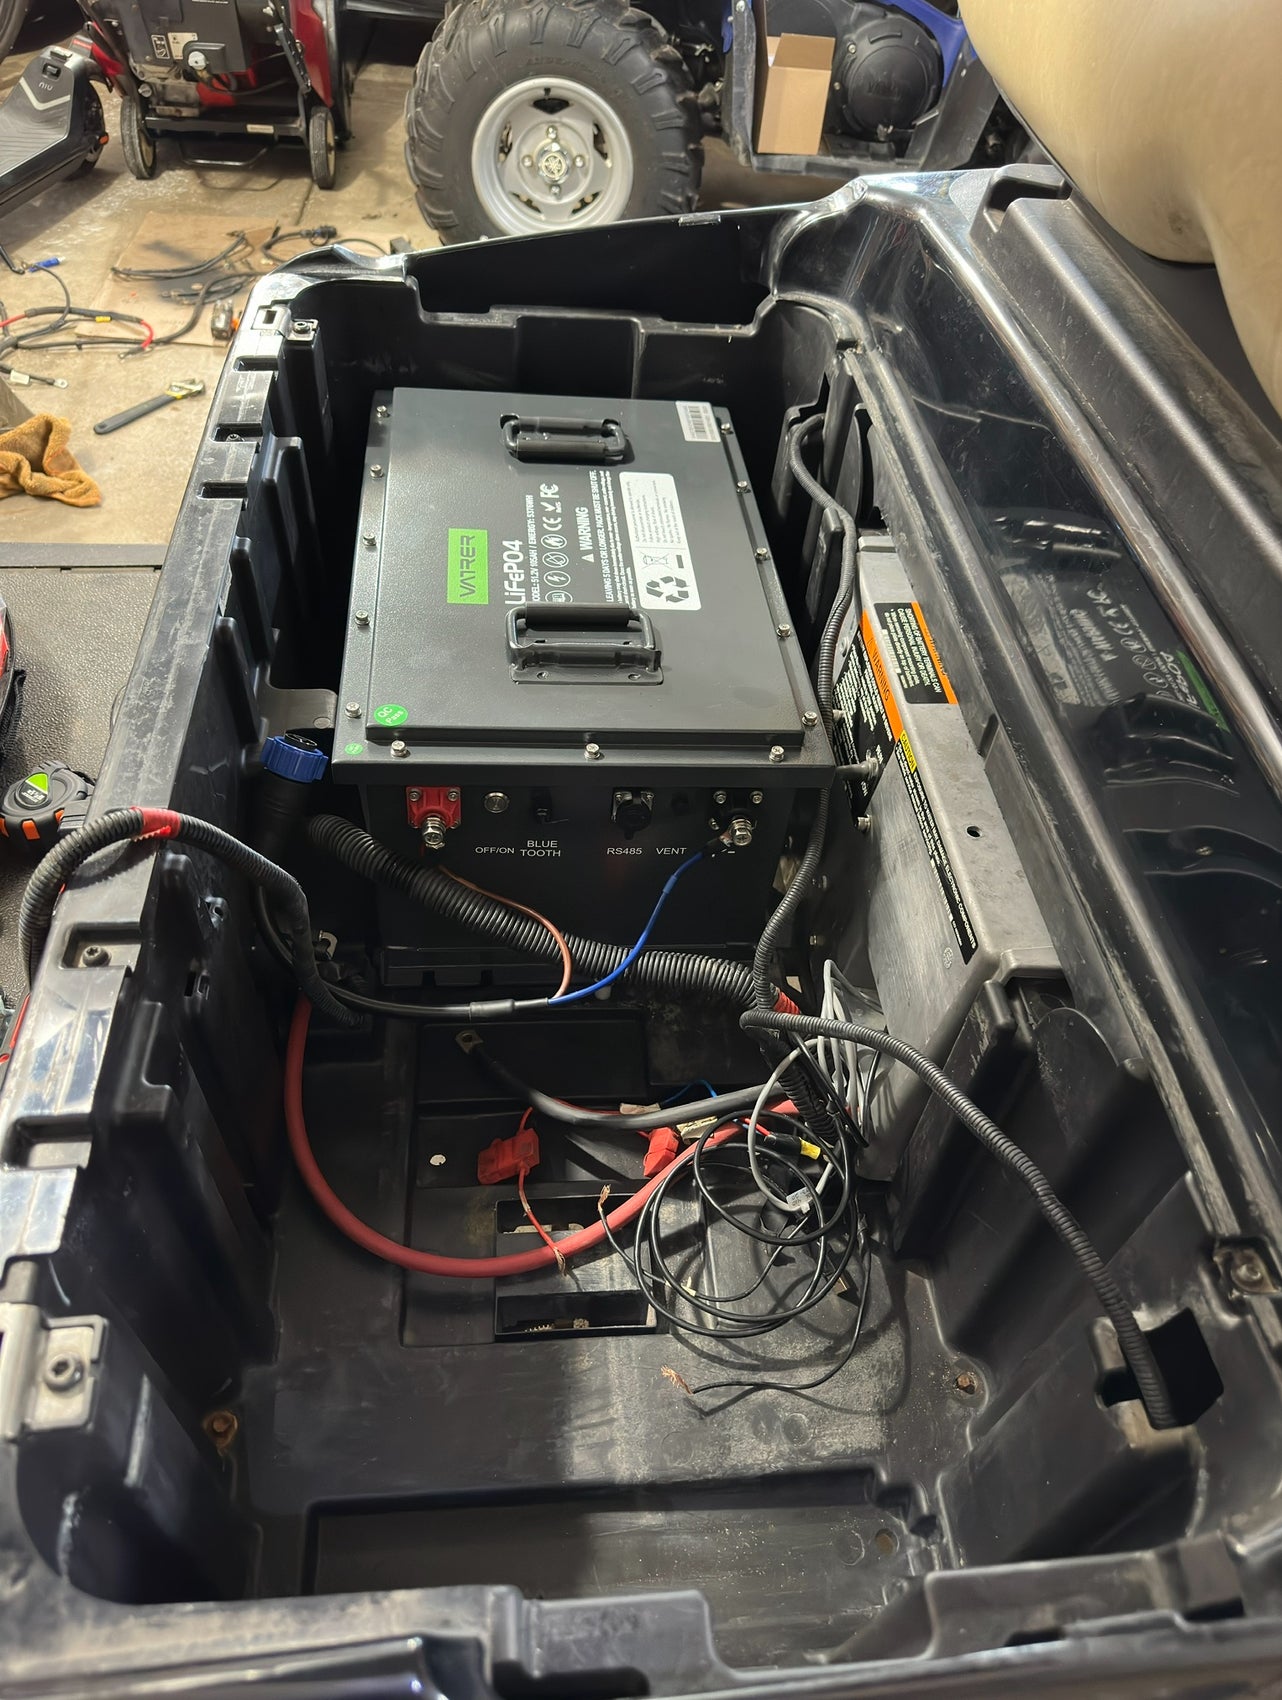 Users install the golf cart lithium battery into the Garia golf cart